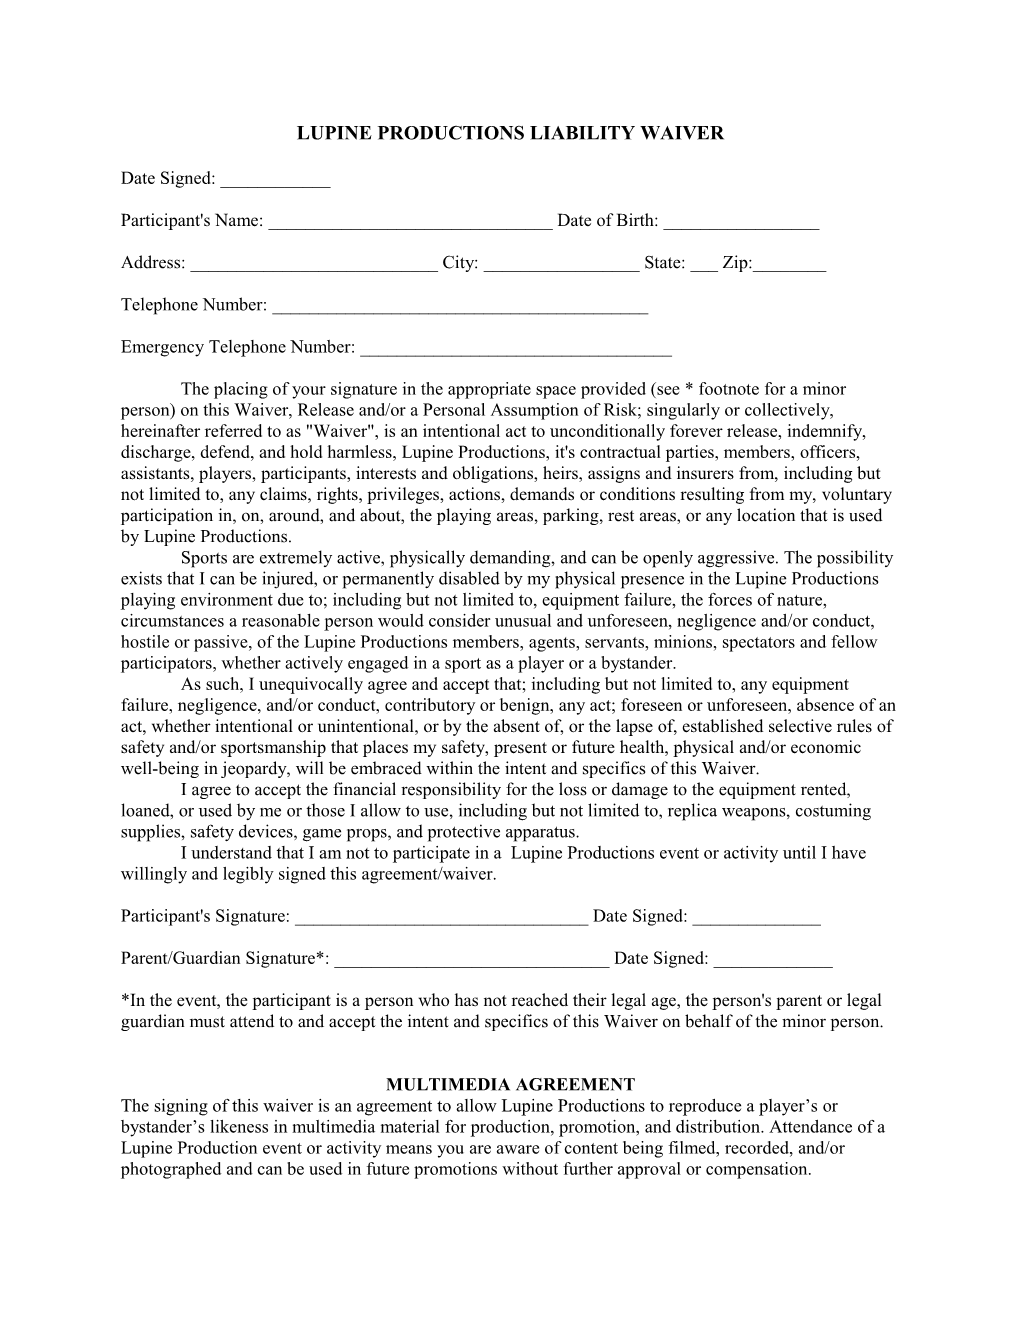 Lupine Productions Liability Waiver